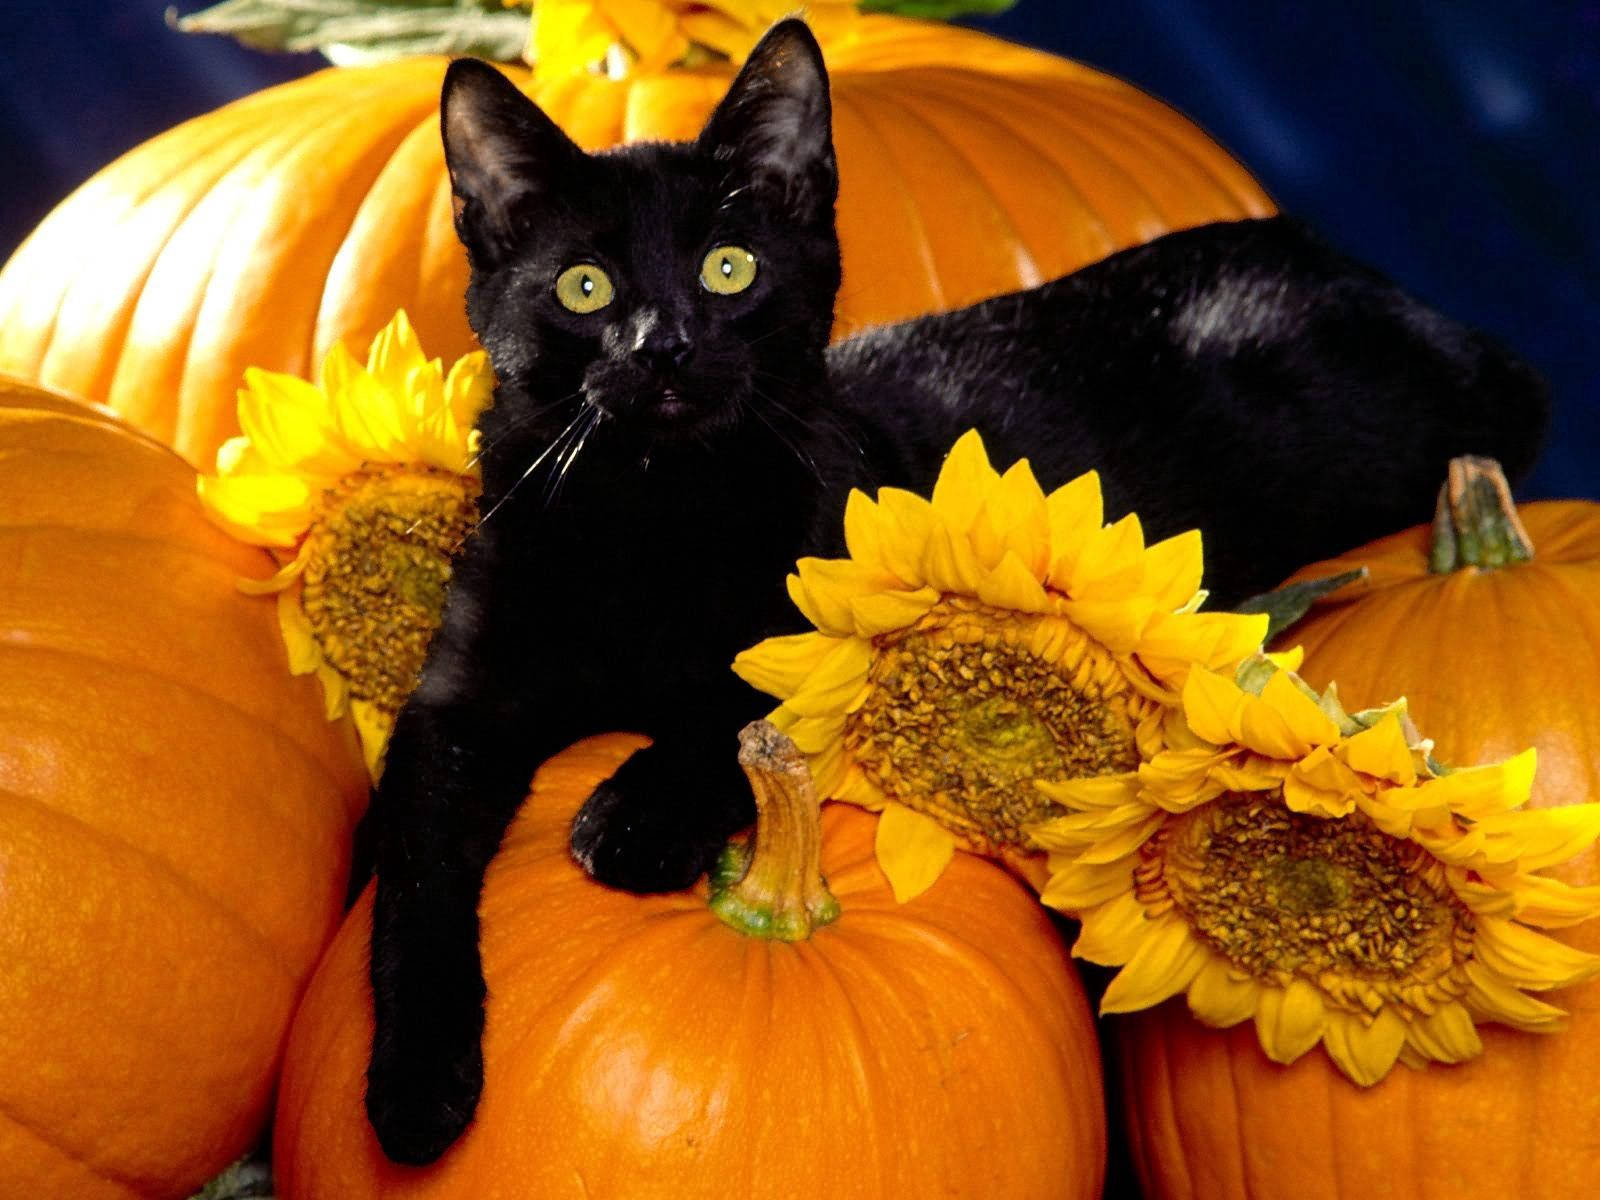 This Halloween Season, One Of The Spookiest Decorations We Have Is Our Black Cat Atop A Pumpkin. Background